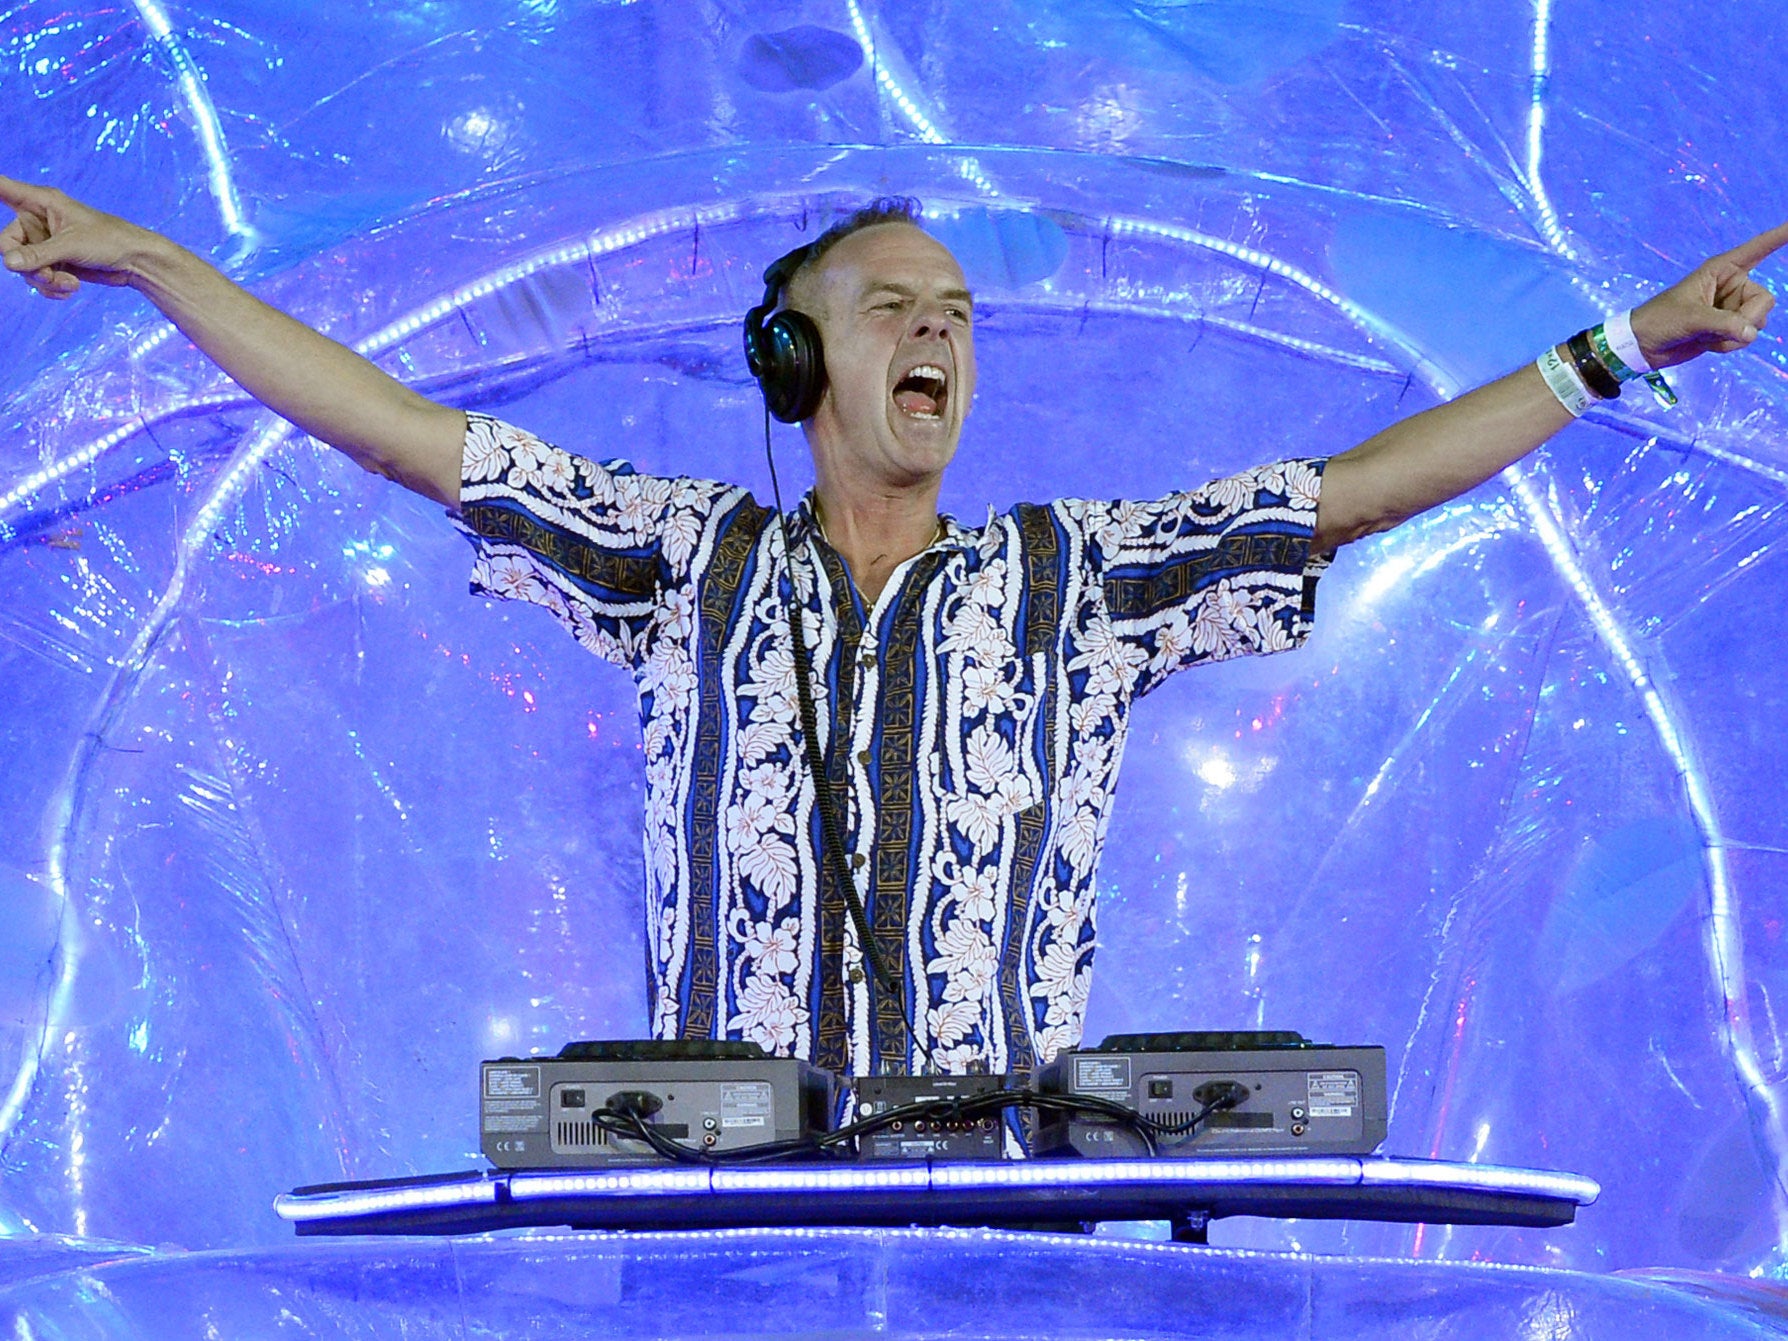 Fatboy Slim (real name Norman Cook), seen here performing at the London 2012 closing ceremony, is in the running to be number one in the singles chart this week